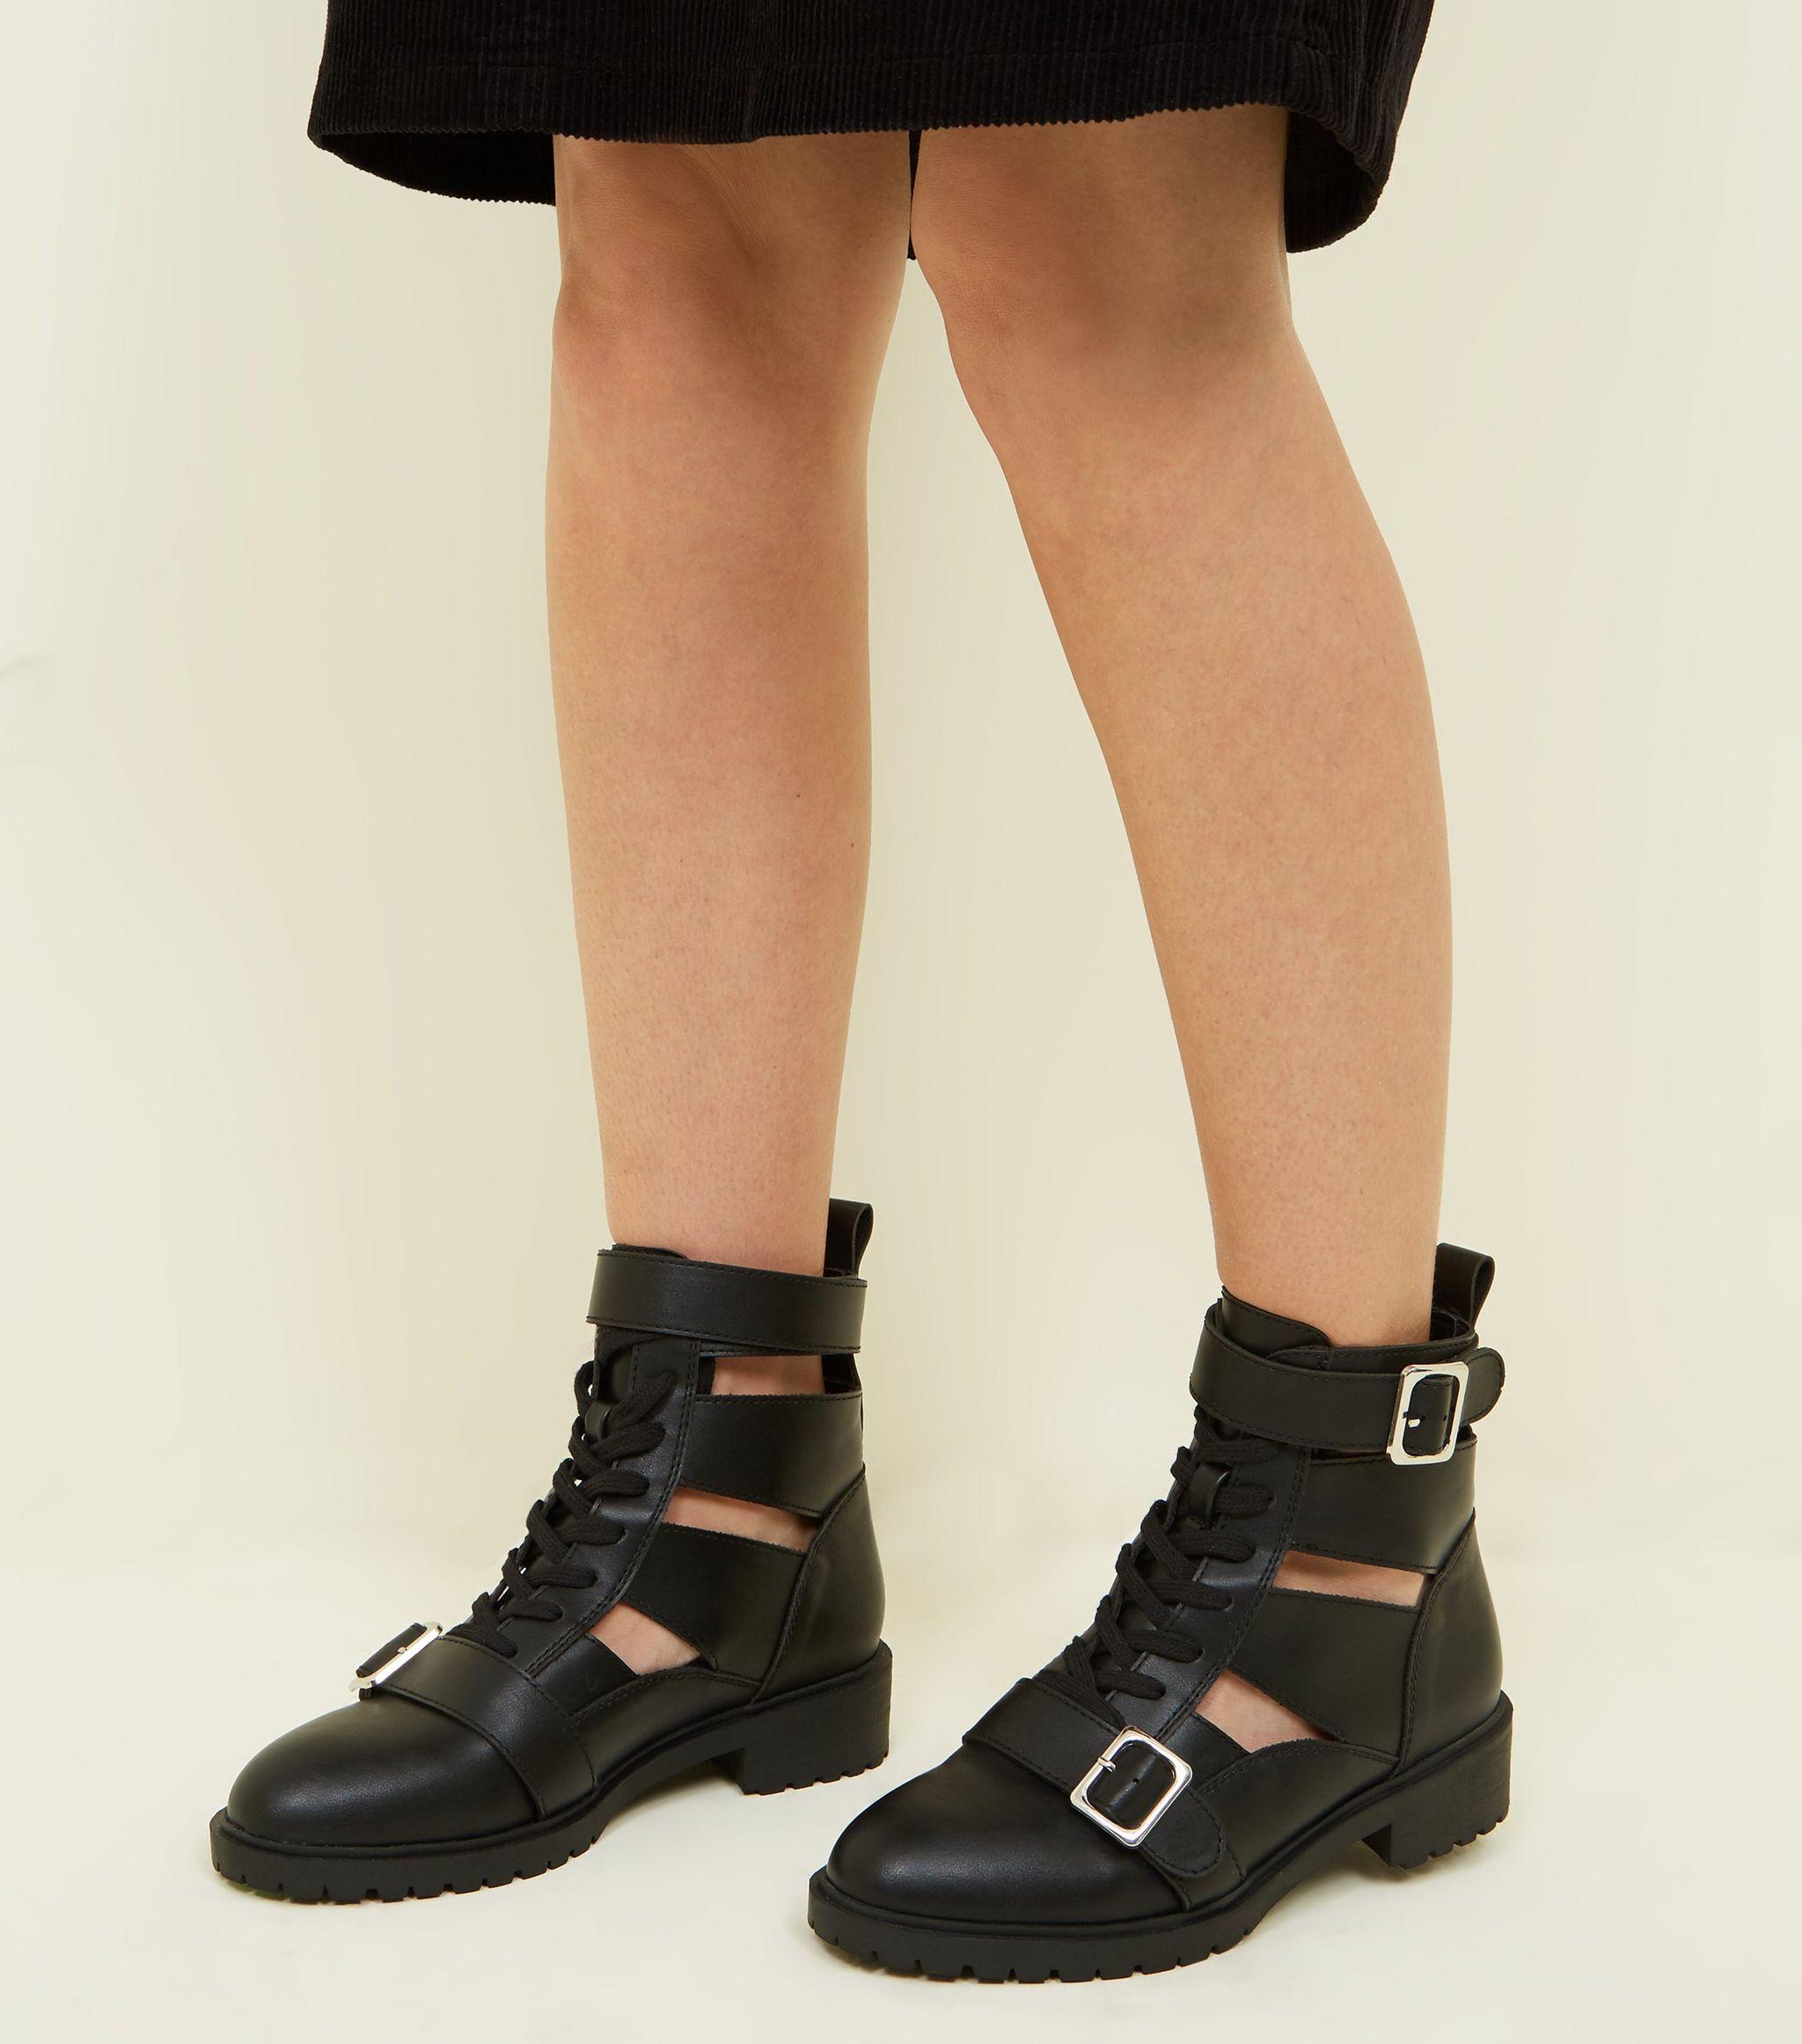 New Look Leather Cut Out Lace Up Biker Boots in Black - Lyst